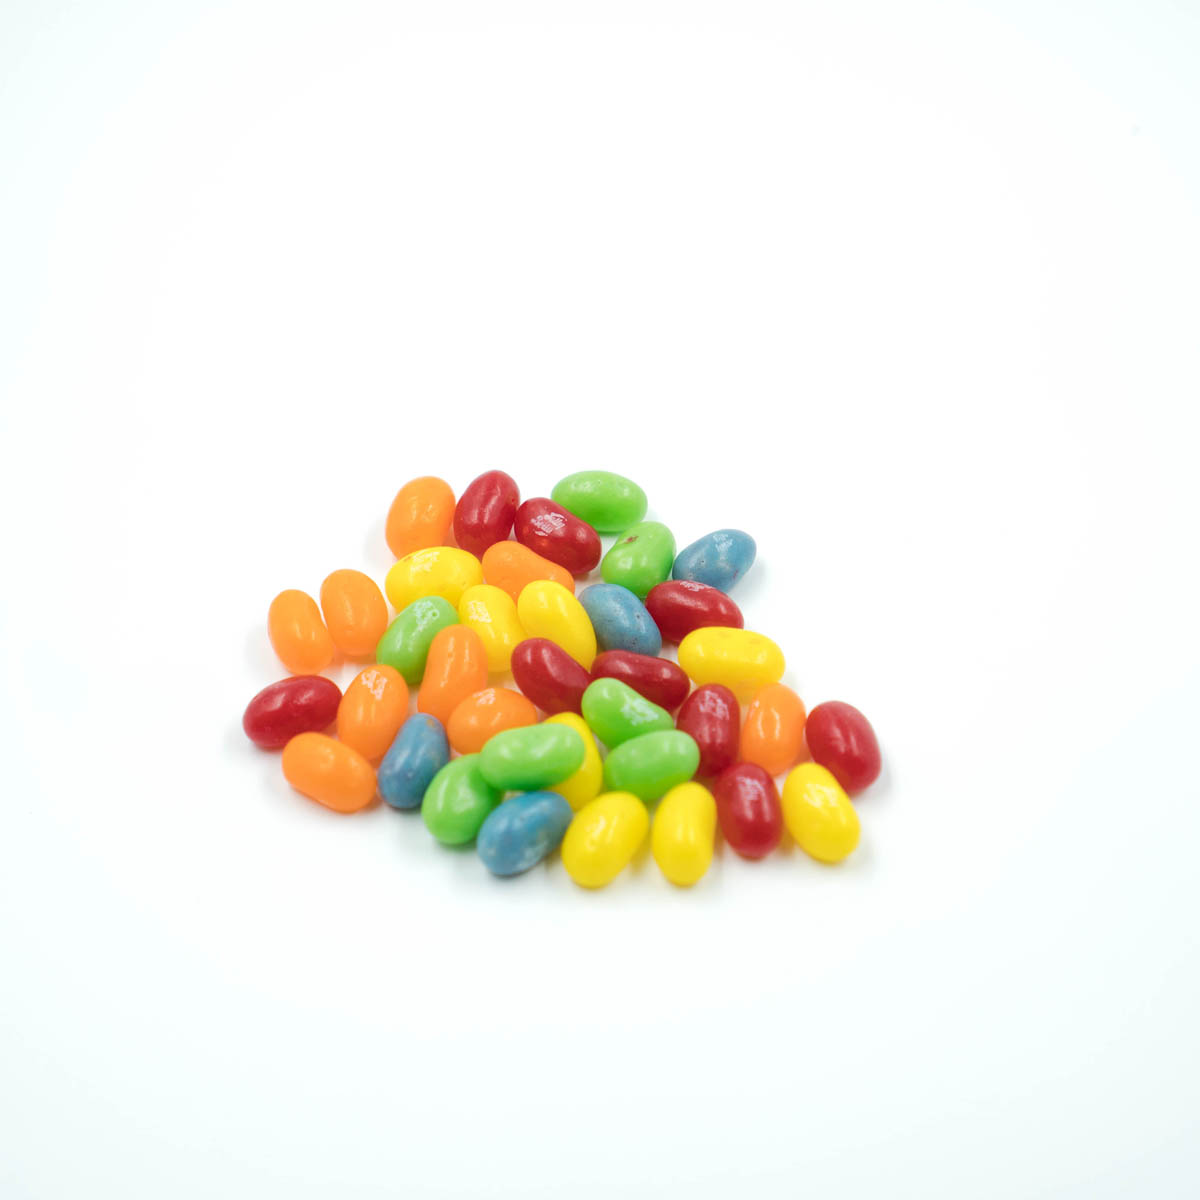 Jelly Belly Candies 5 Sour Flavors